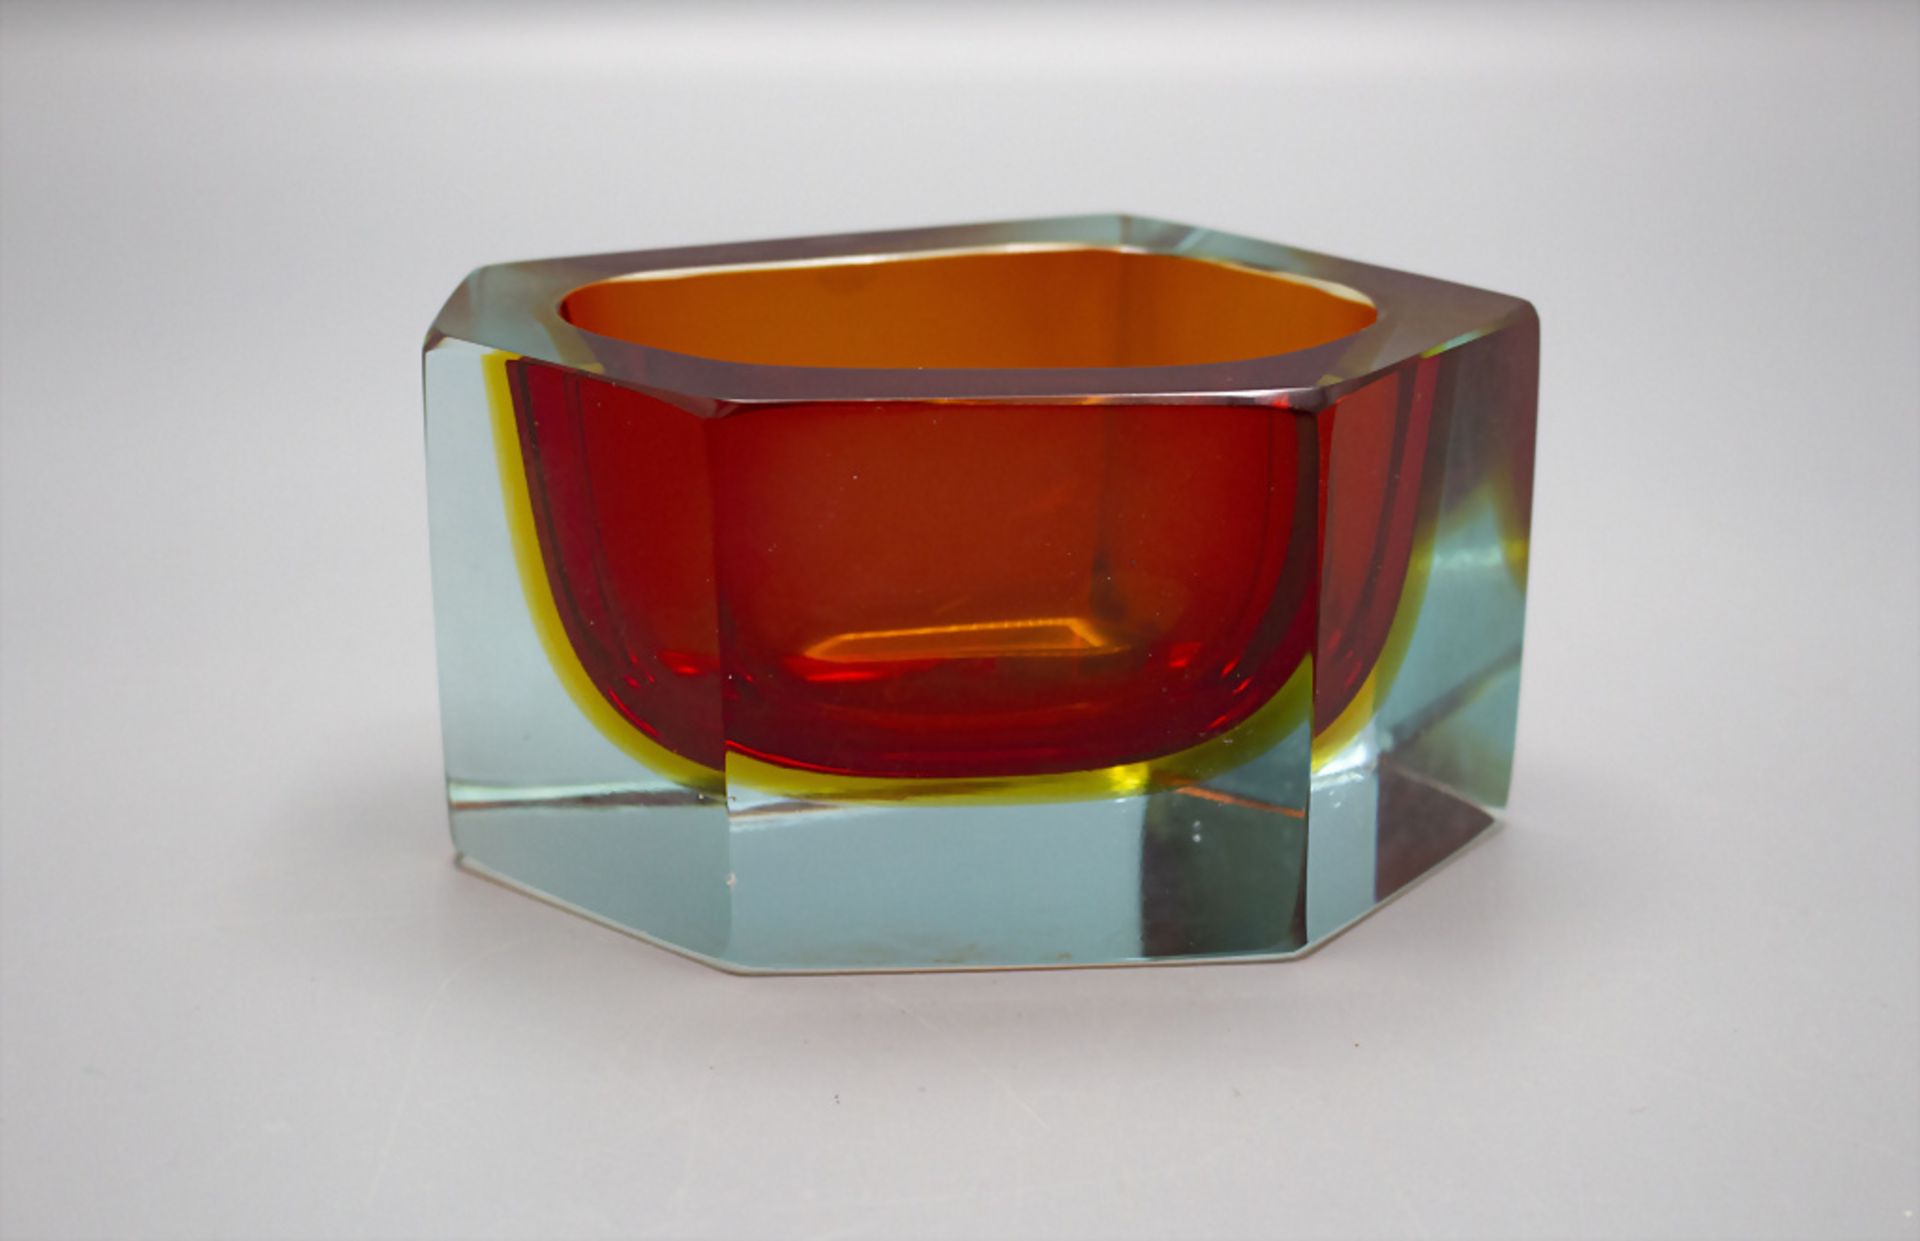 Aschenbecher / An ashtray, wohl Murano, 70/80er Jahre - Image 4 of 4